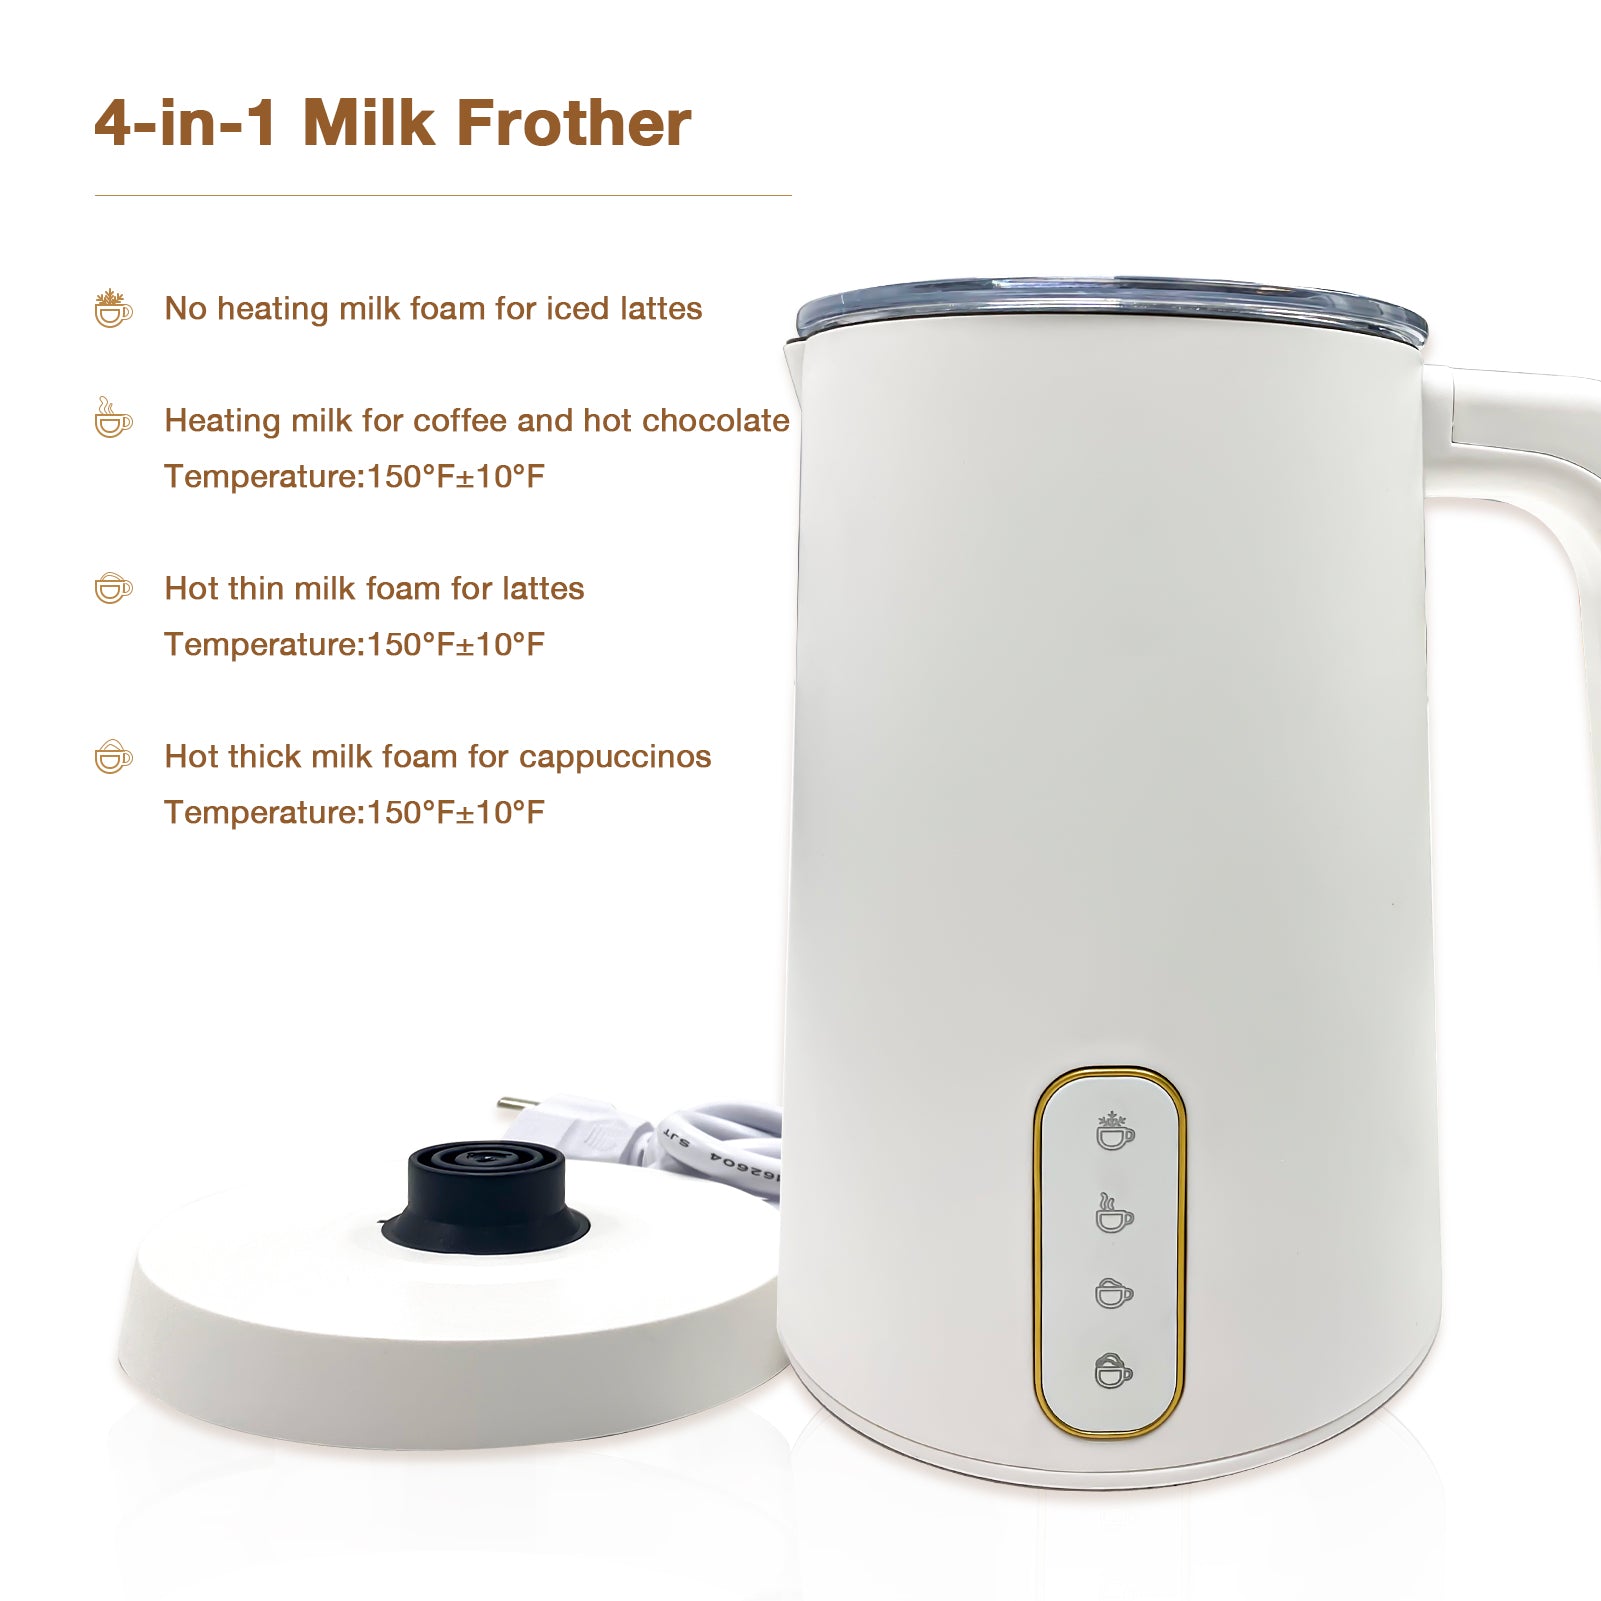 Milk Frother 4 in 1 Electric Milk Steamer Automatic Hot & Cold Foam Maker  and Milk Warmer for Latte, Cappuccinos, Macchiato, Hot Chocolate Milk